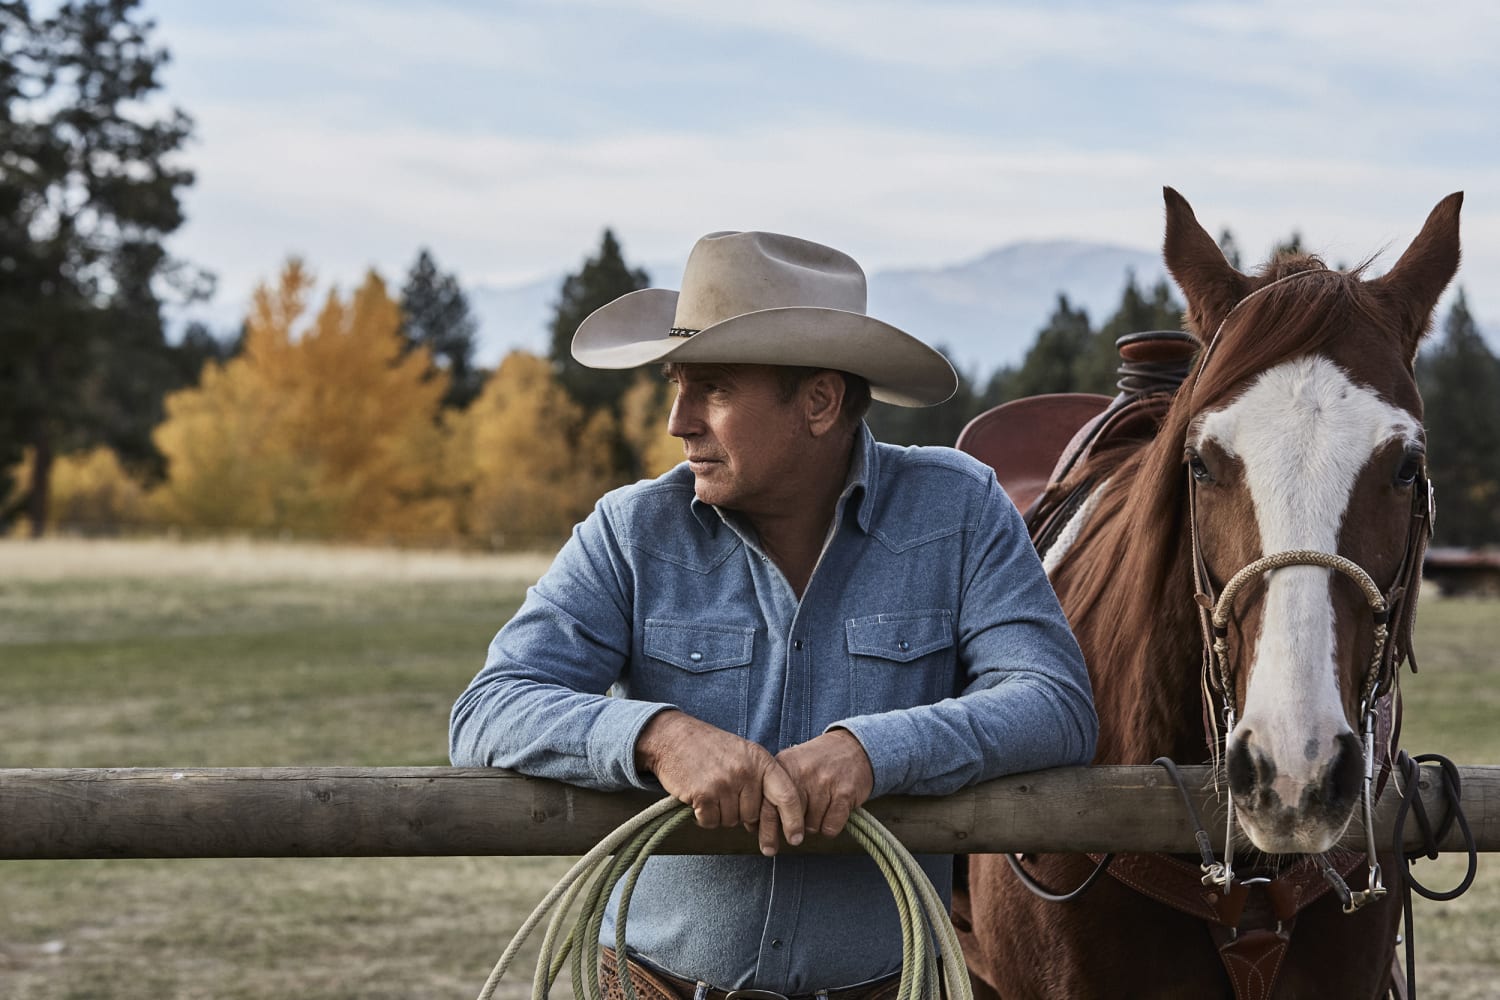 Will Kevin Costner return to 'Yellowstone'? Paramount is 'confident' star will